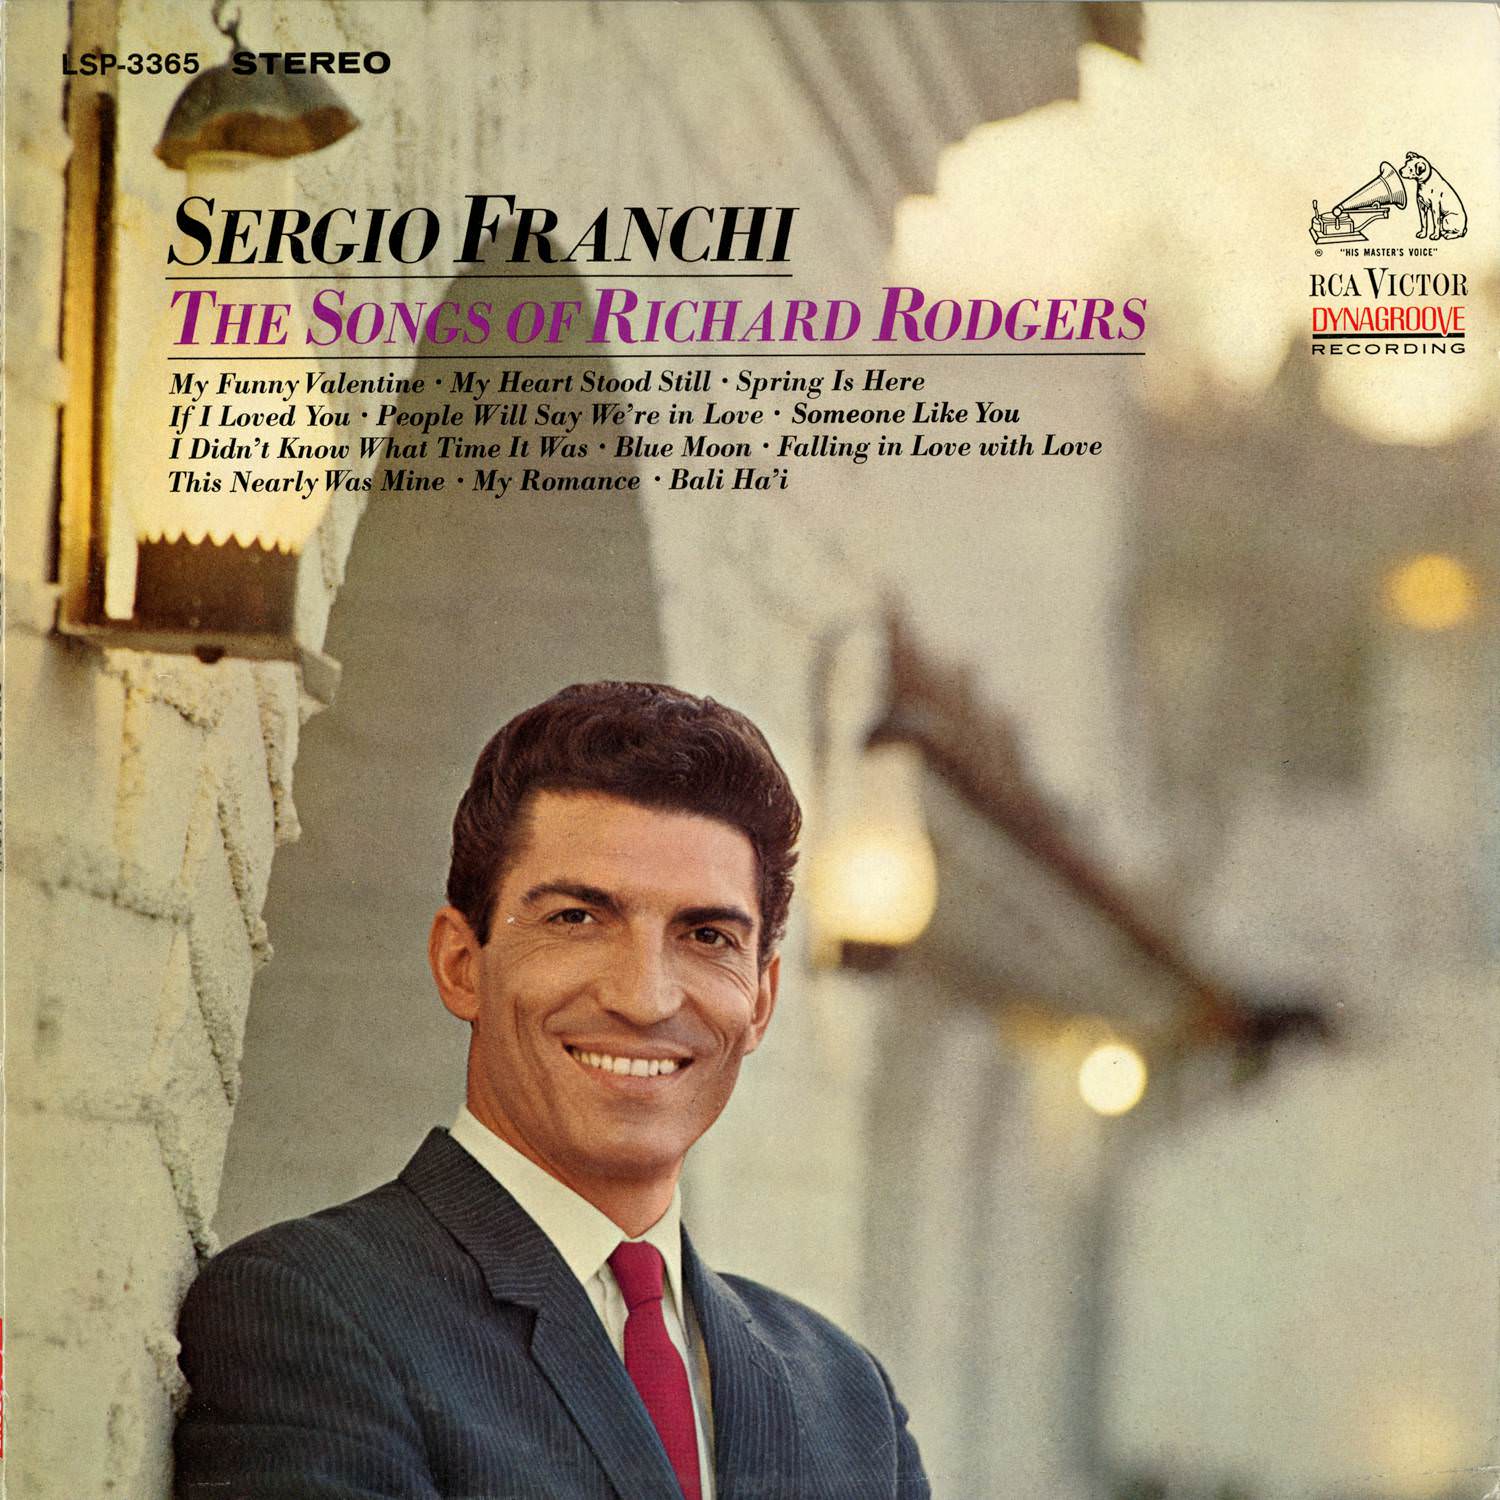 Sergio Franchi – The Songs Of Richard Rodgers (1965/2015) [AcousticSounds FLAC 24bit/96kHz]